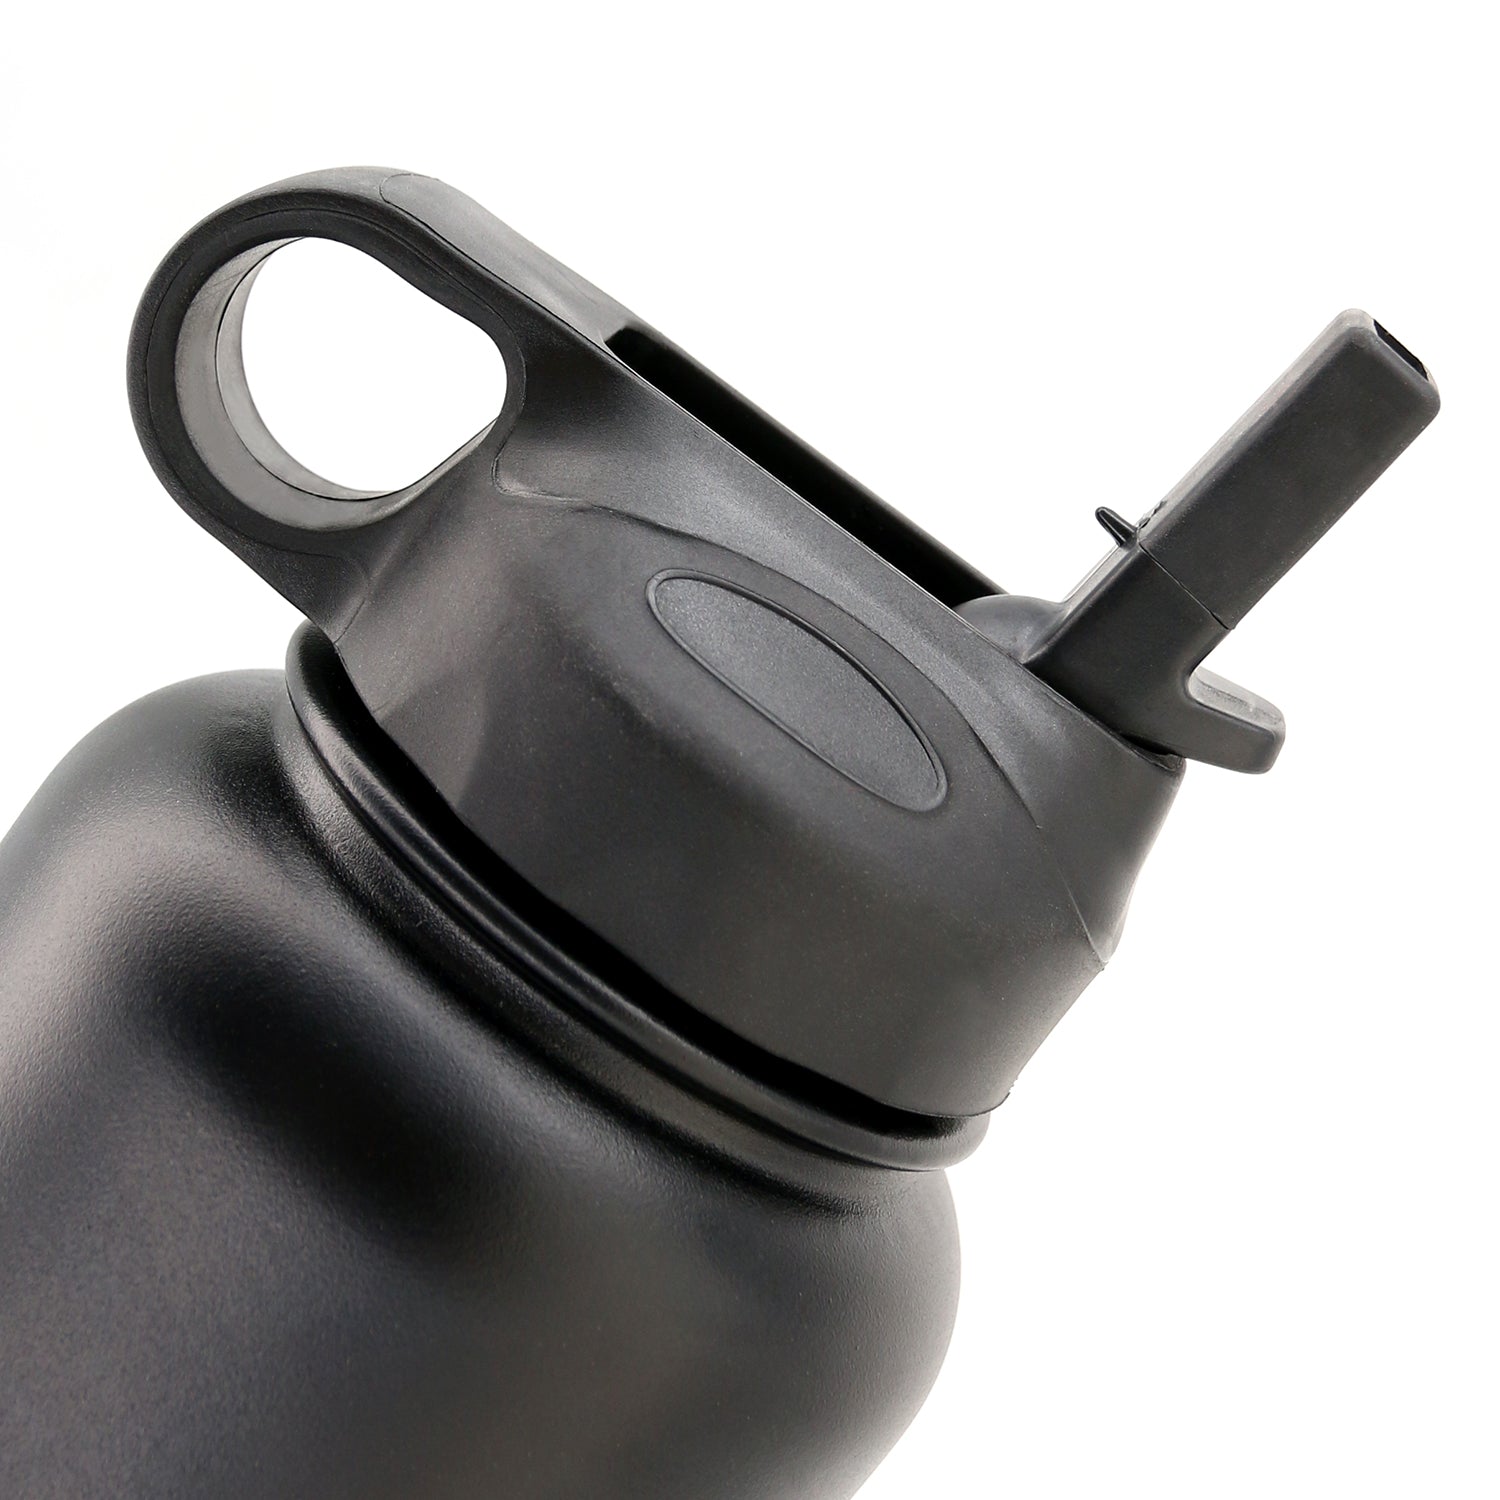 Hydro Flask - Wide Mouth Straw Lid Black